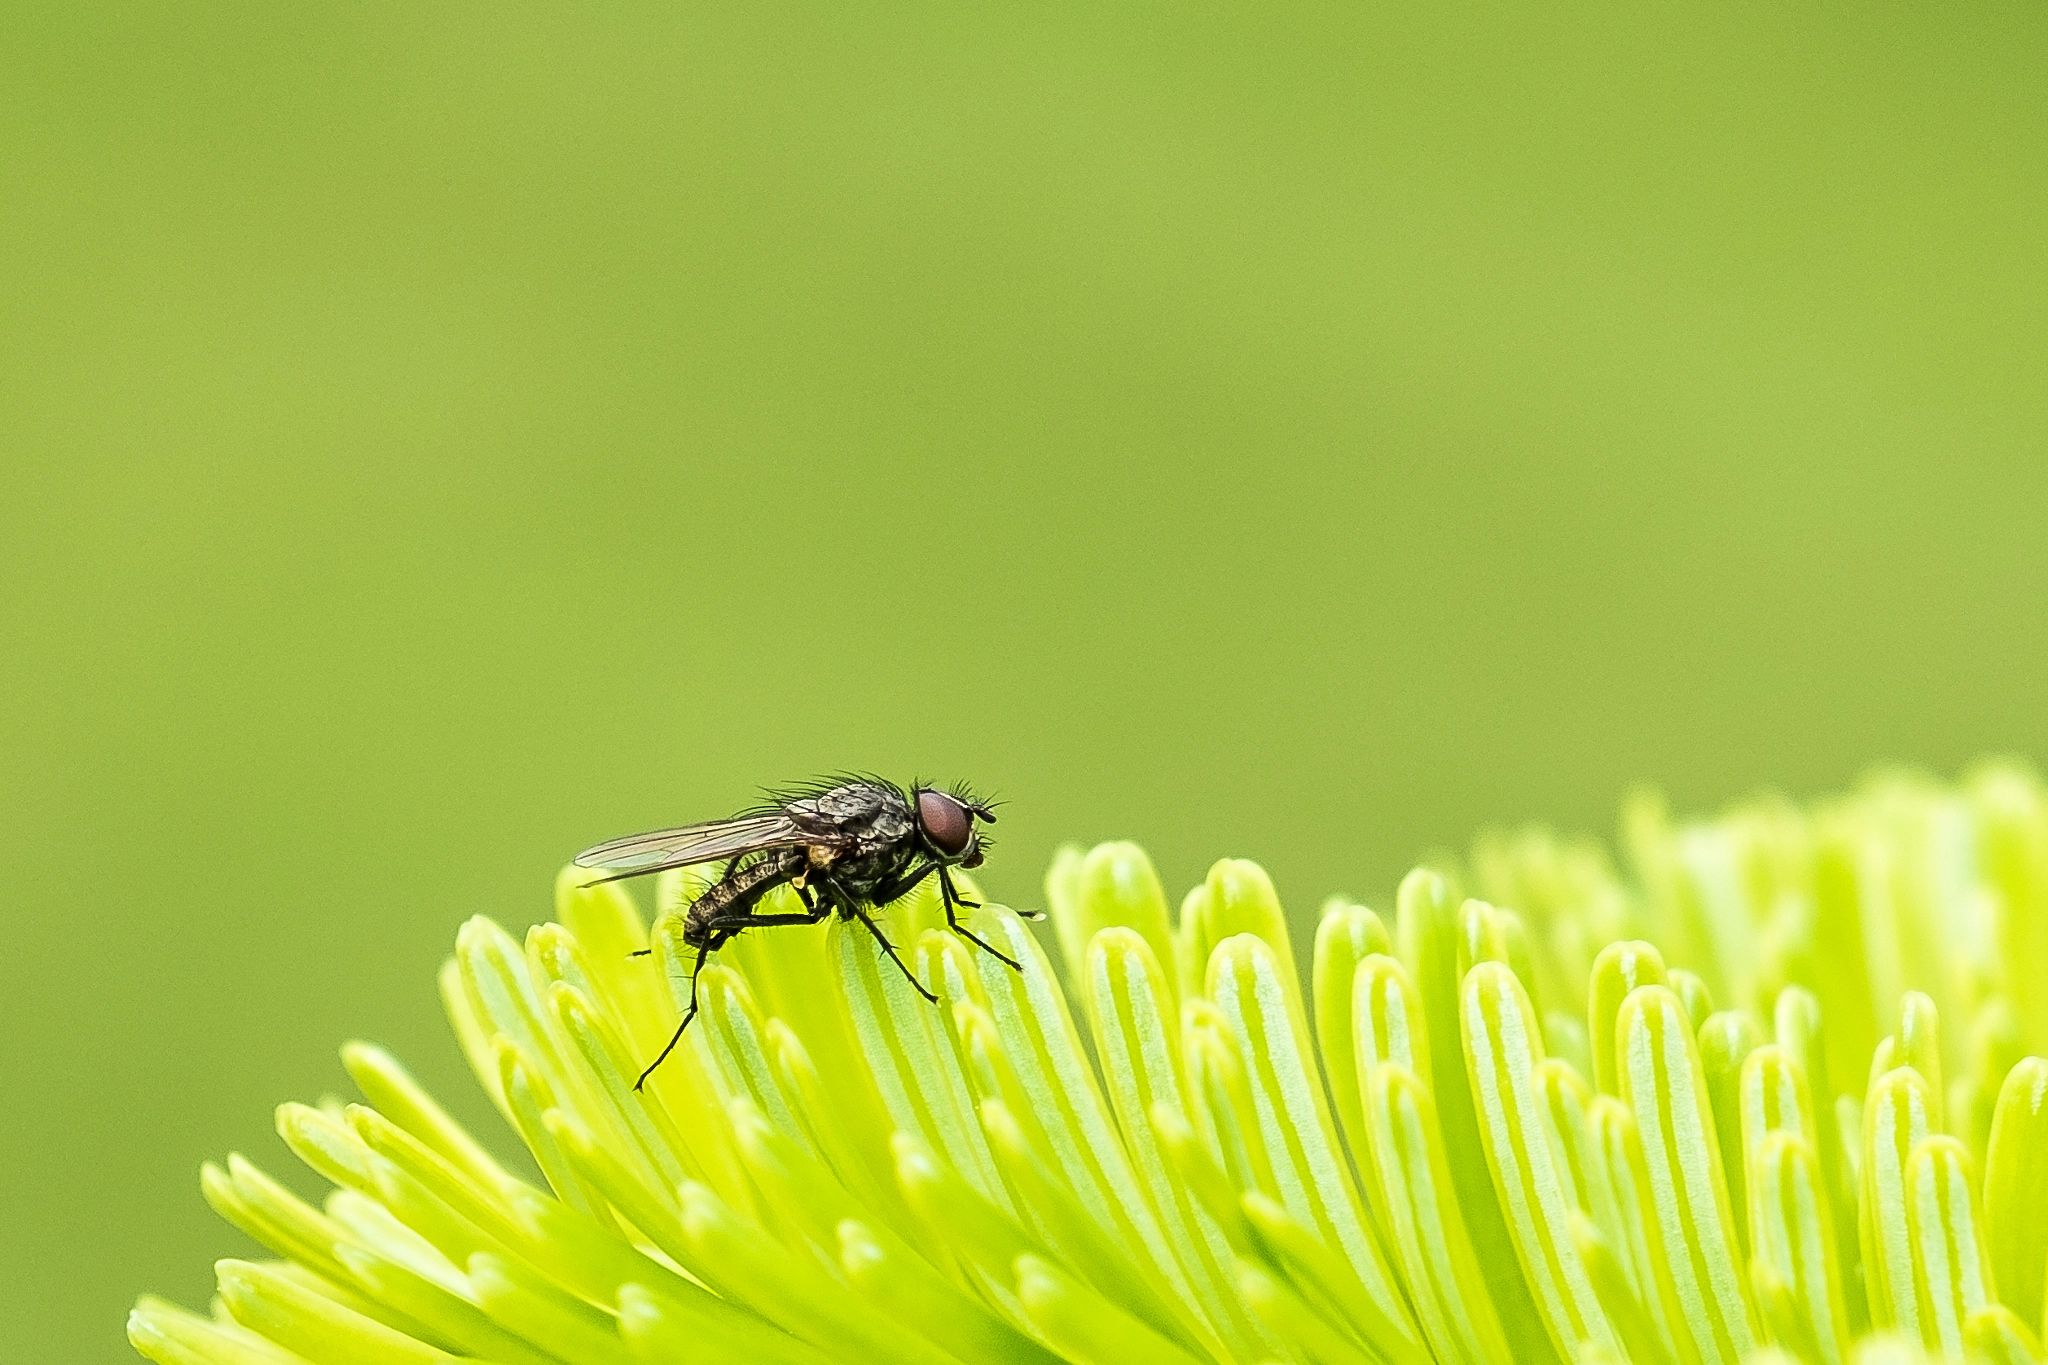 Fujifilm X-E1 + Fujifilm XF 18-135mm F3.5-5.6 R LM OIS WR sample photo. The fly on the green photography